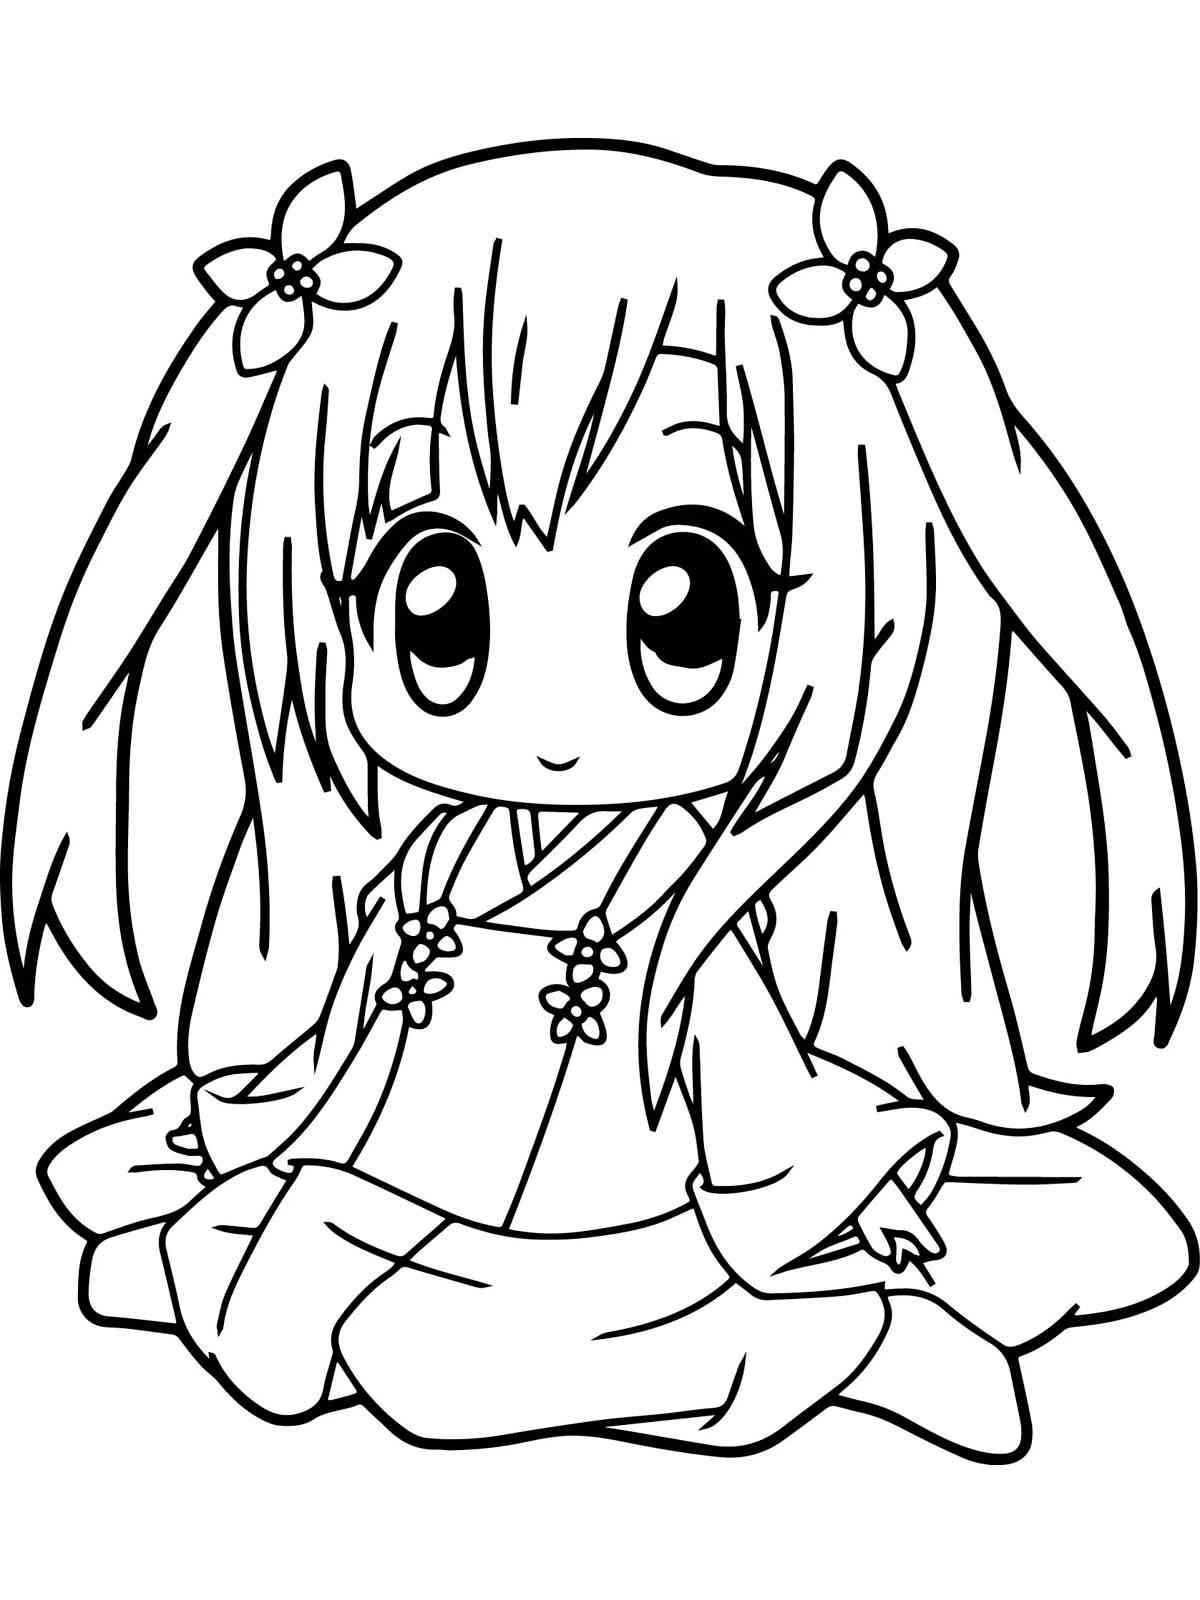 Anime Girl coloring pages